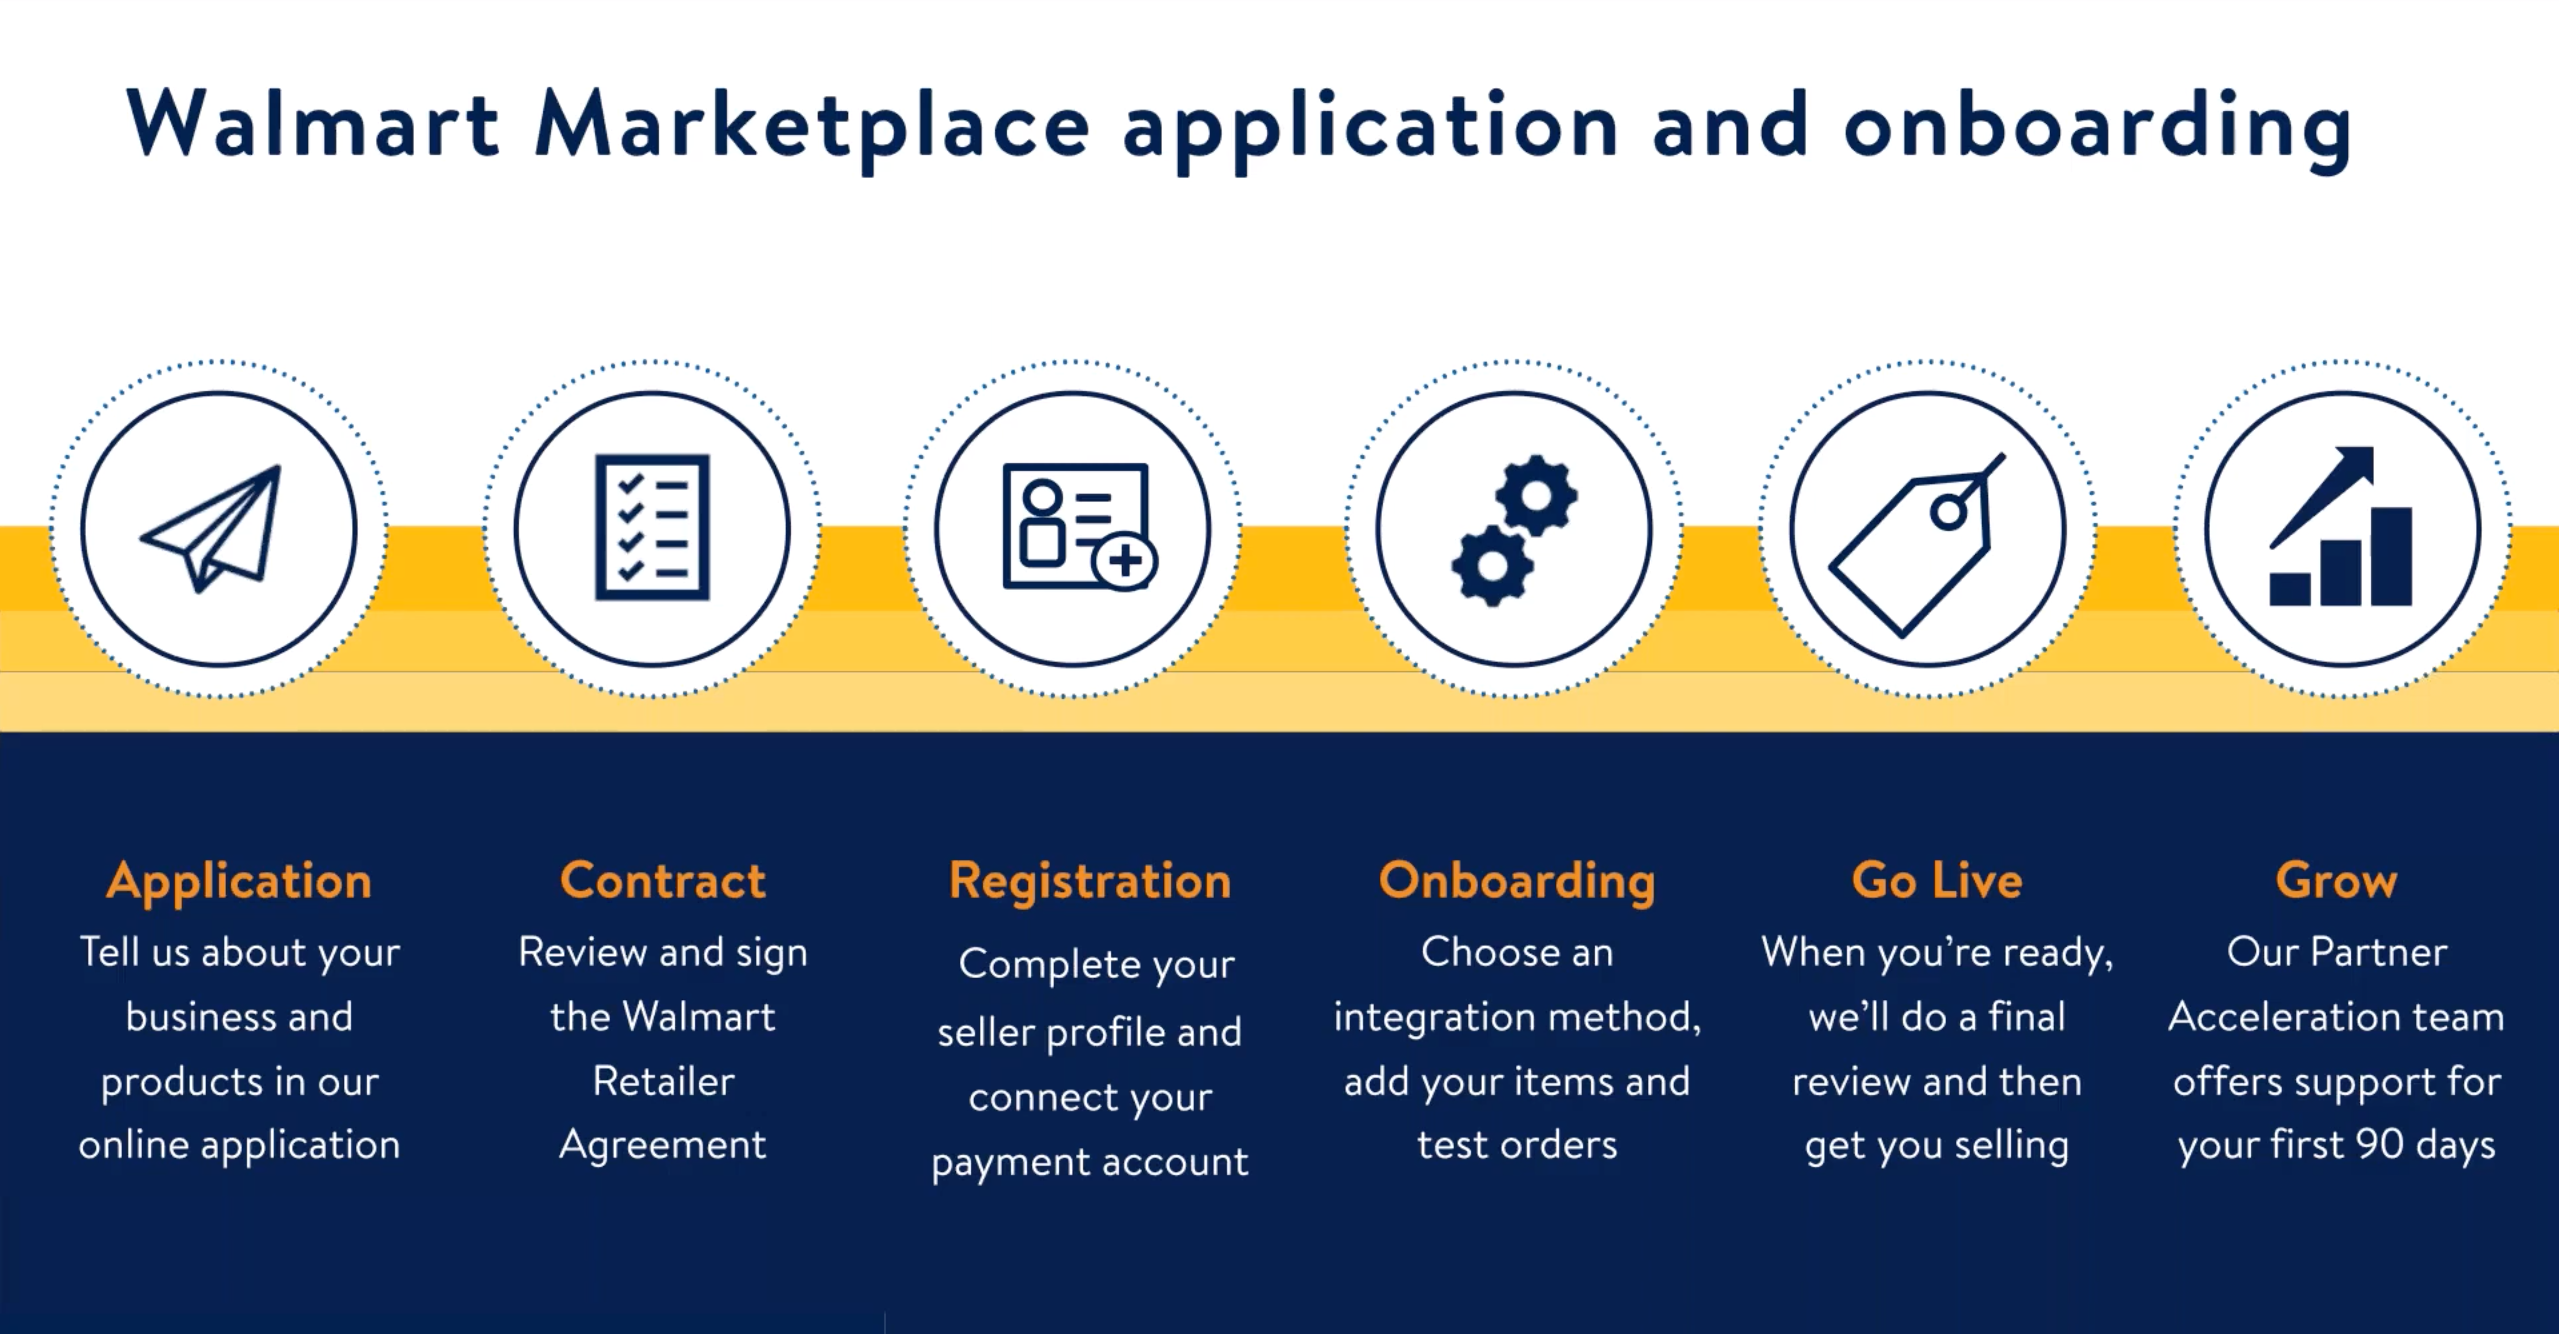 Walmart Marketplace application and onboarding